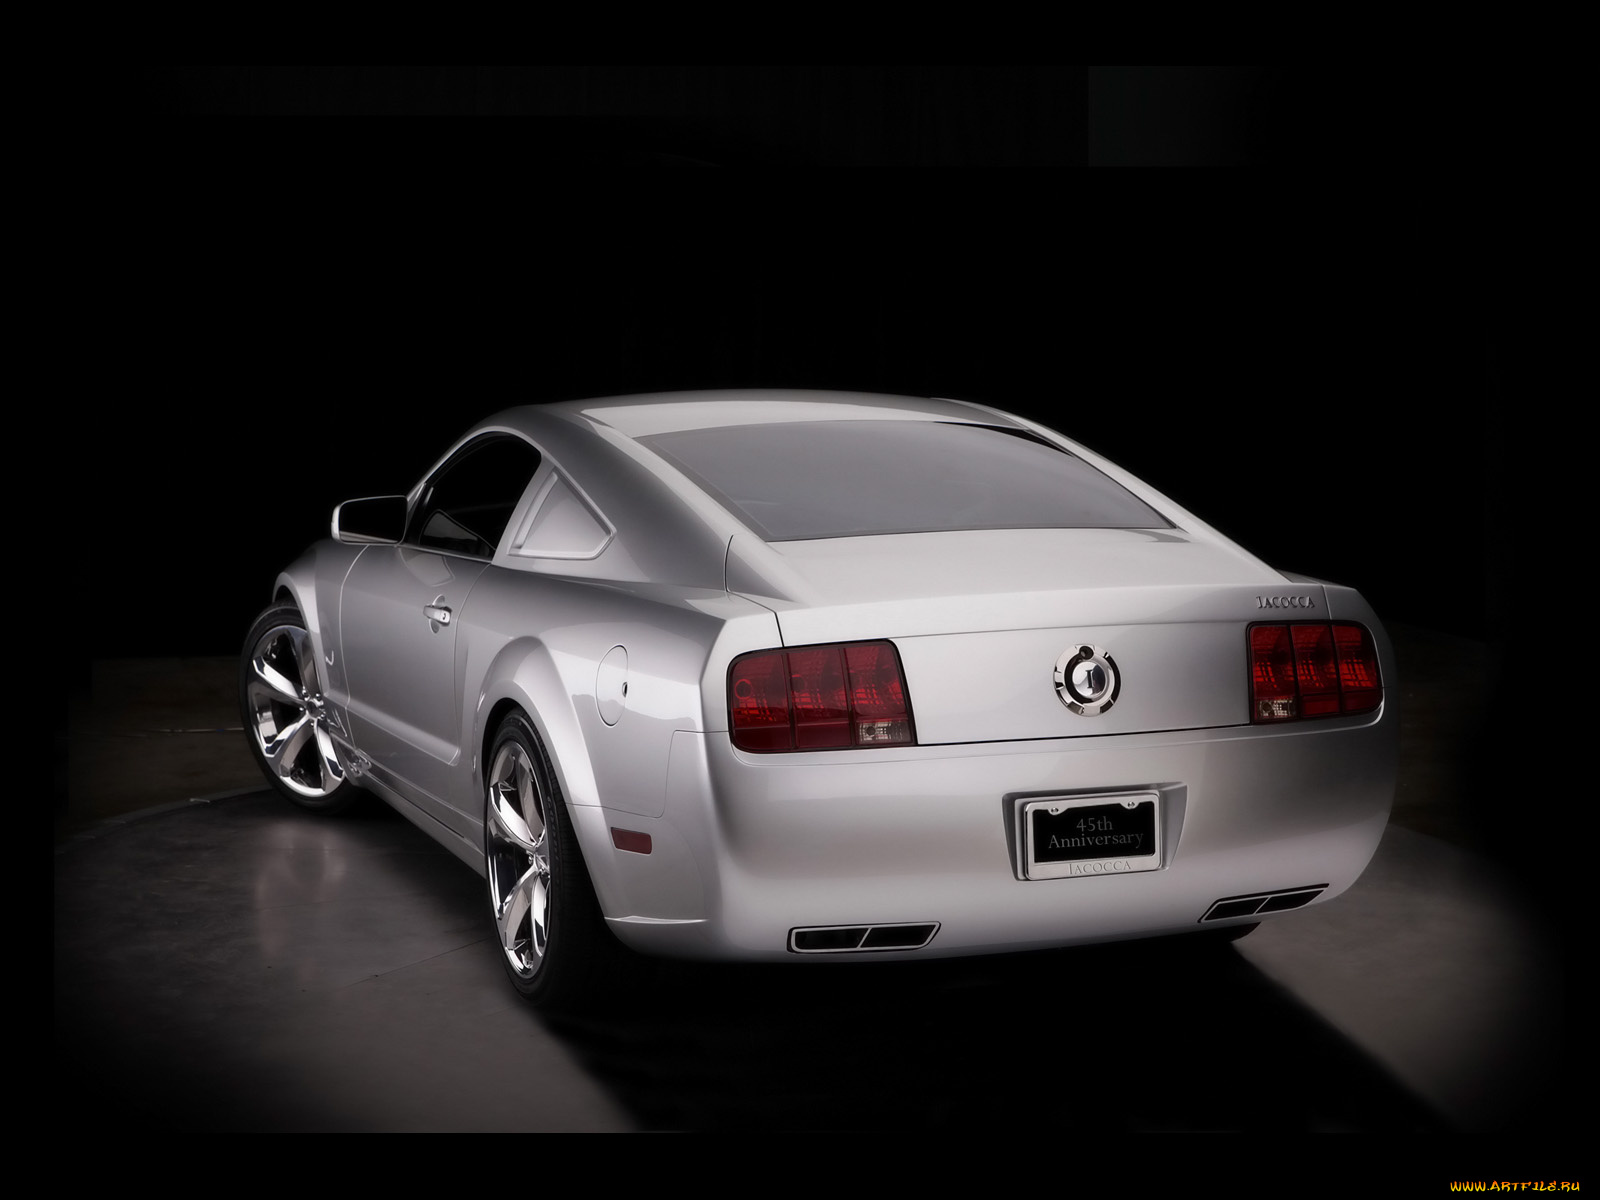 2009, iacocca, silver, 45th, anniversary, ford, mustang, автомобили